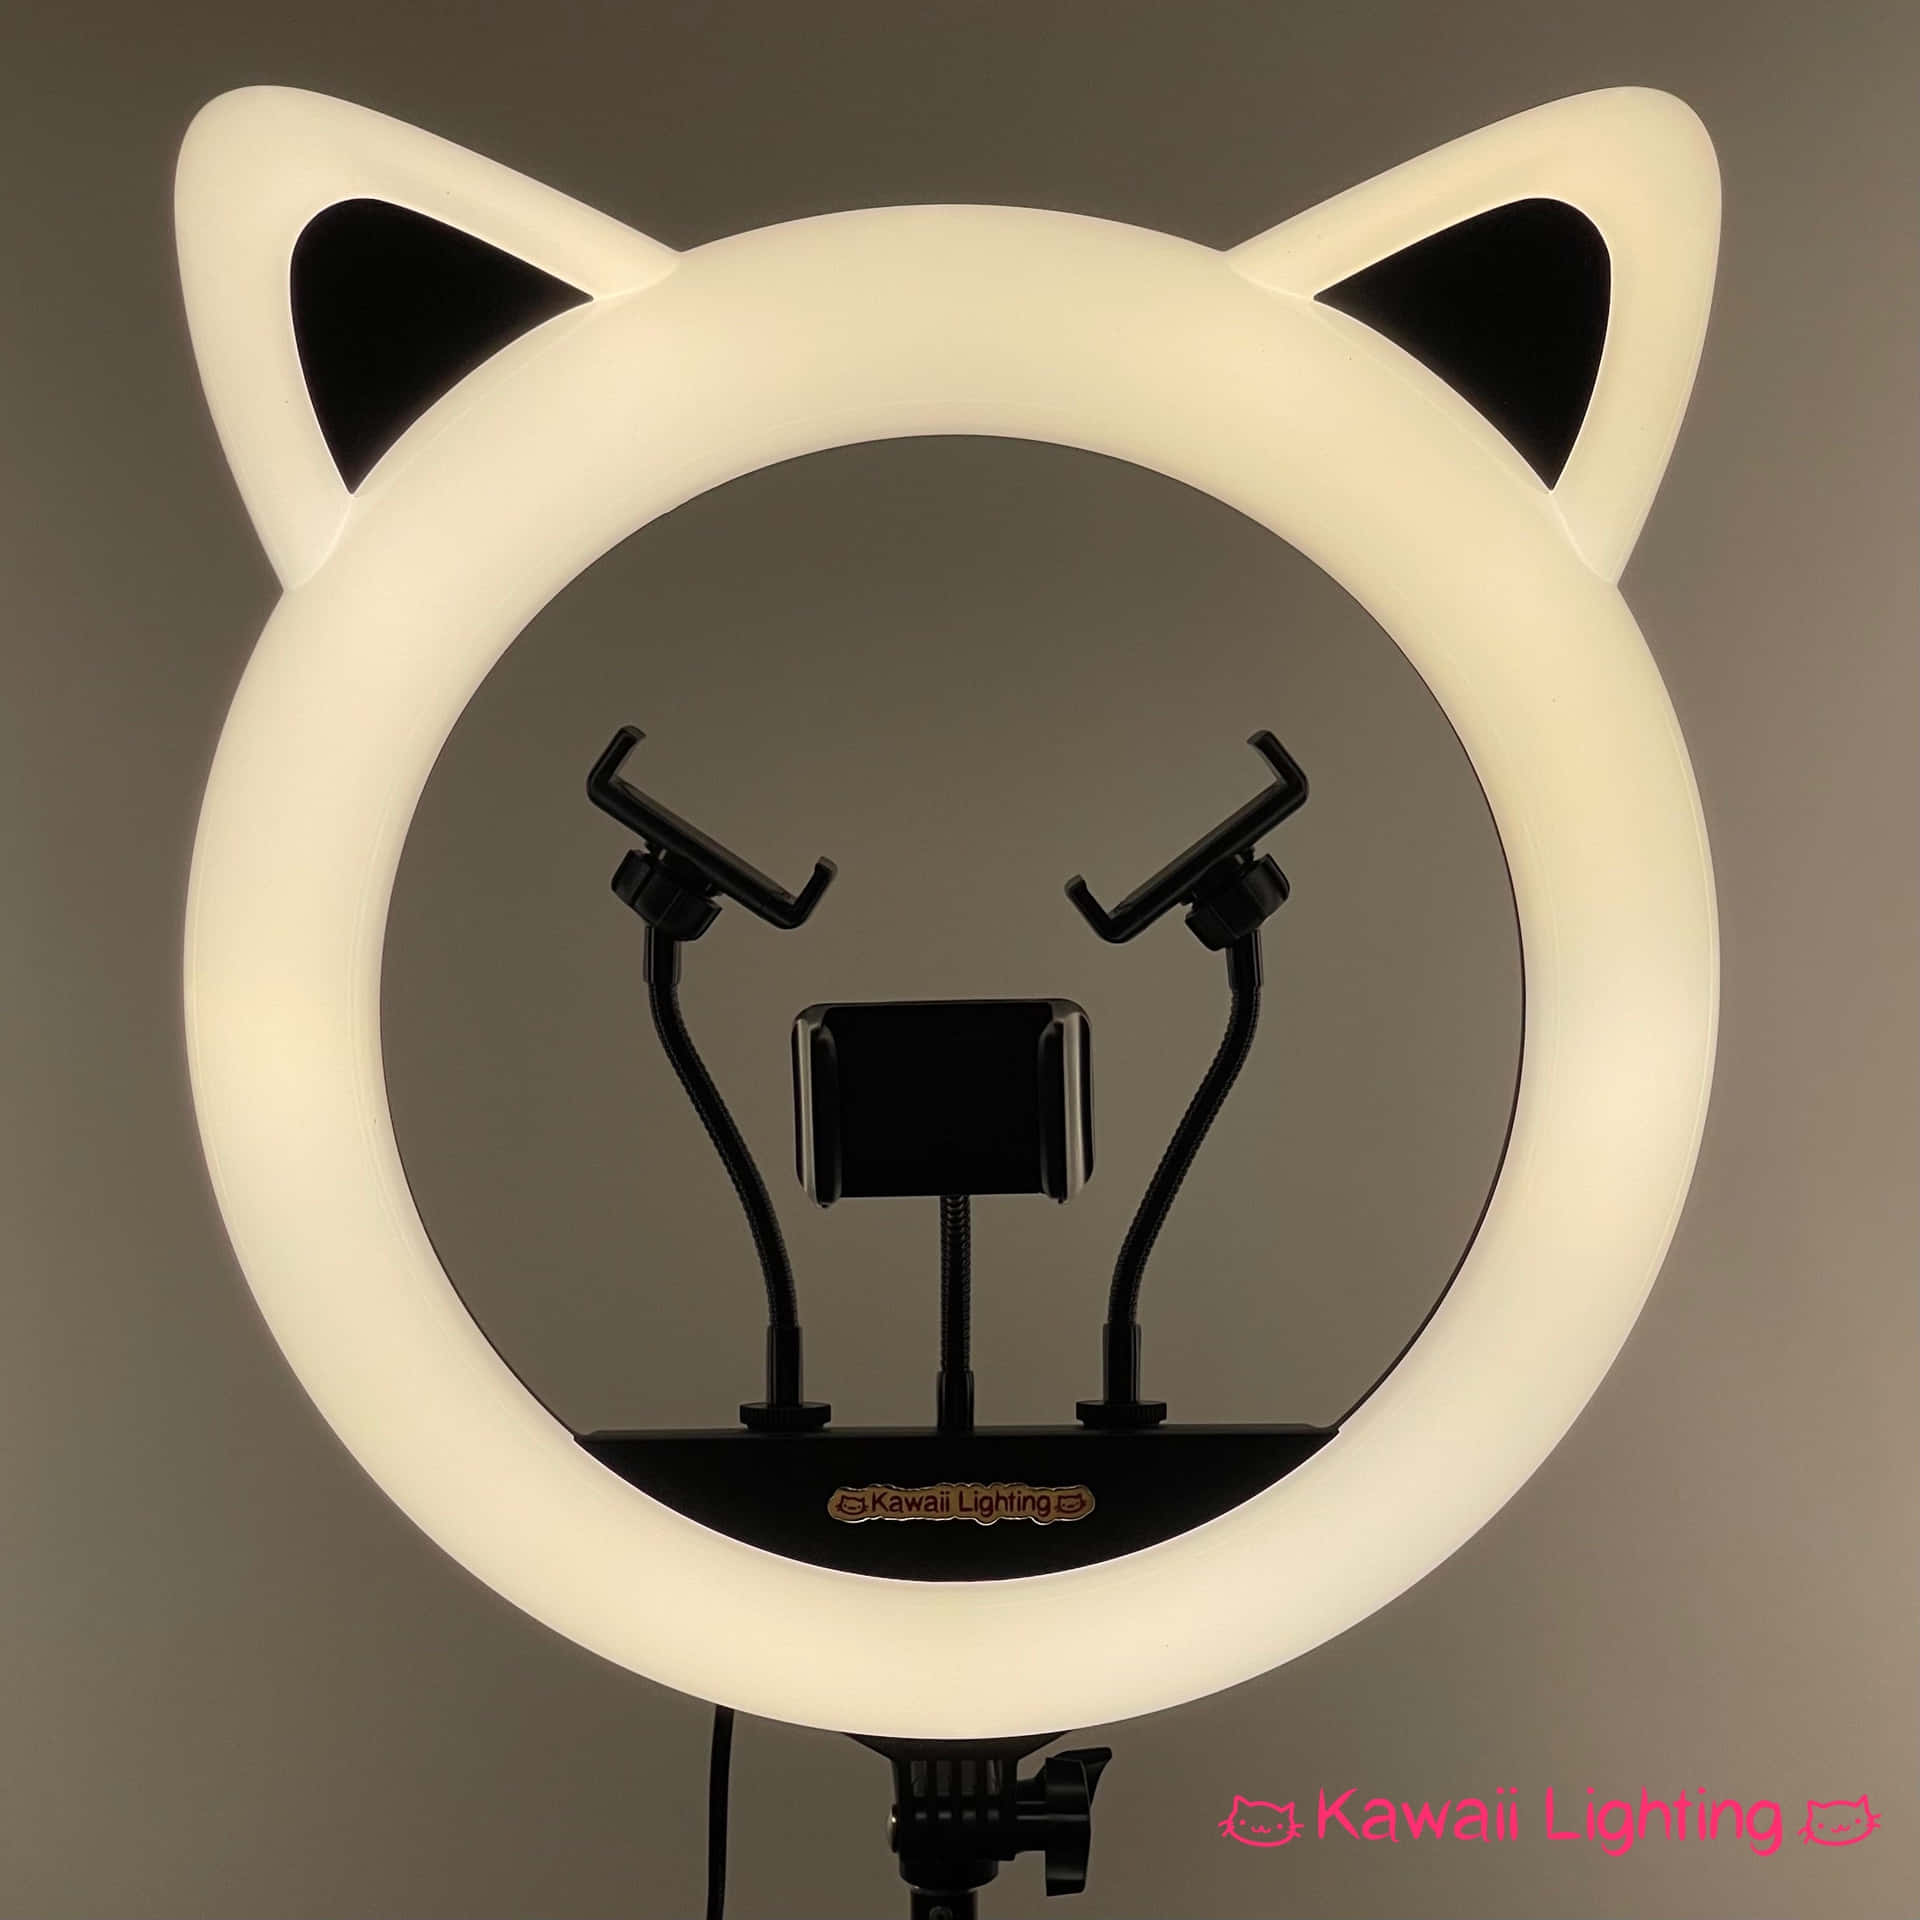 "Light up Your Life with a Ring Light"